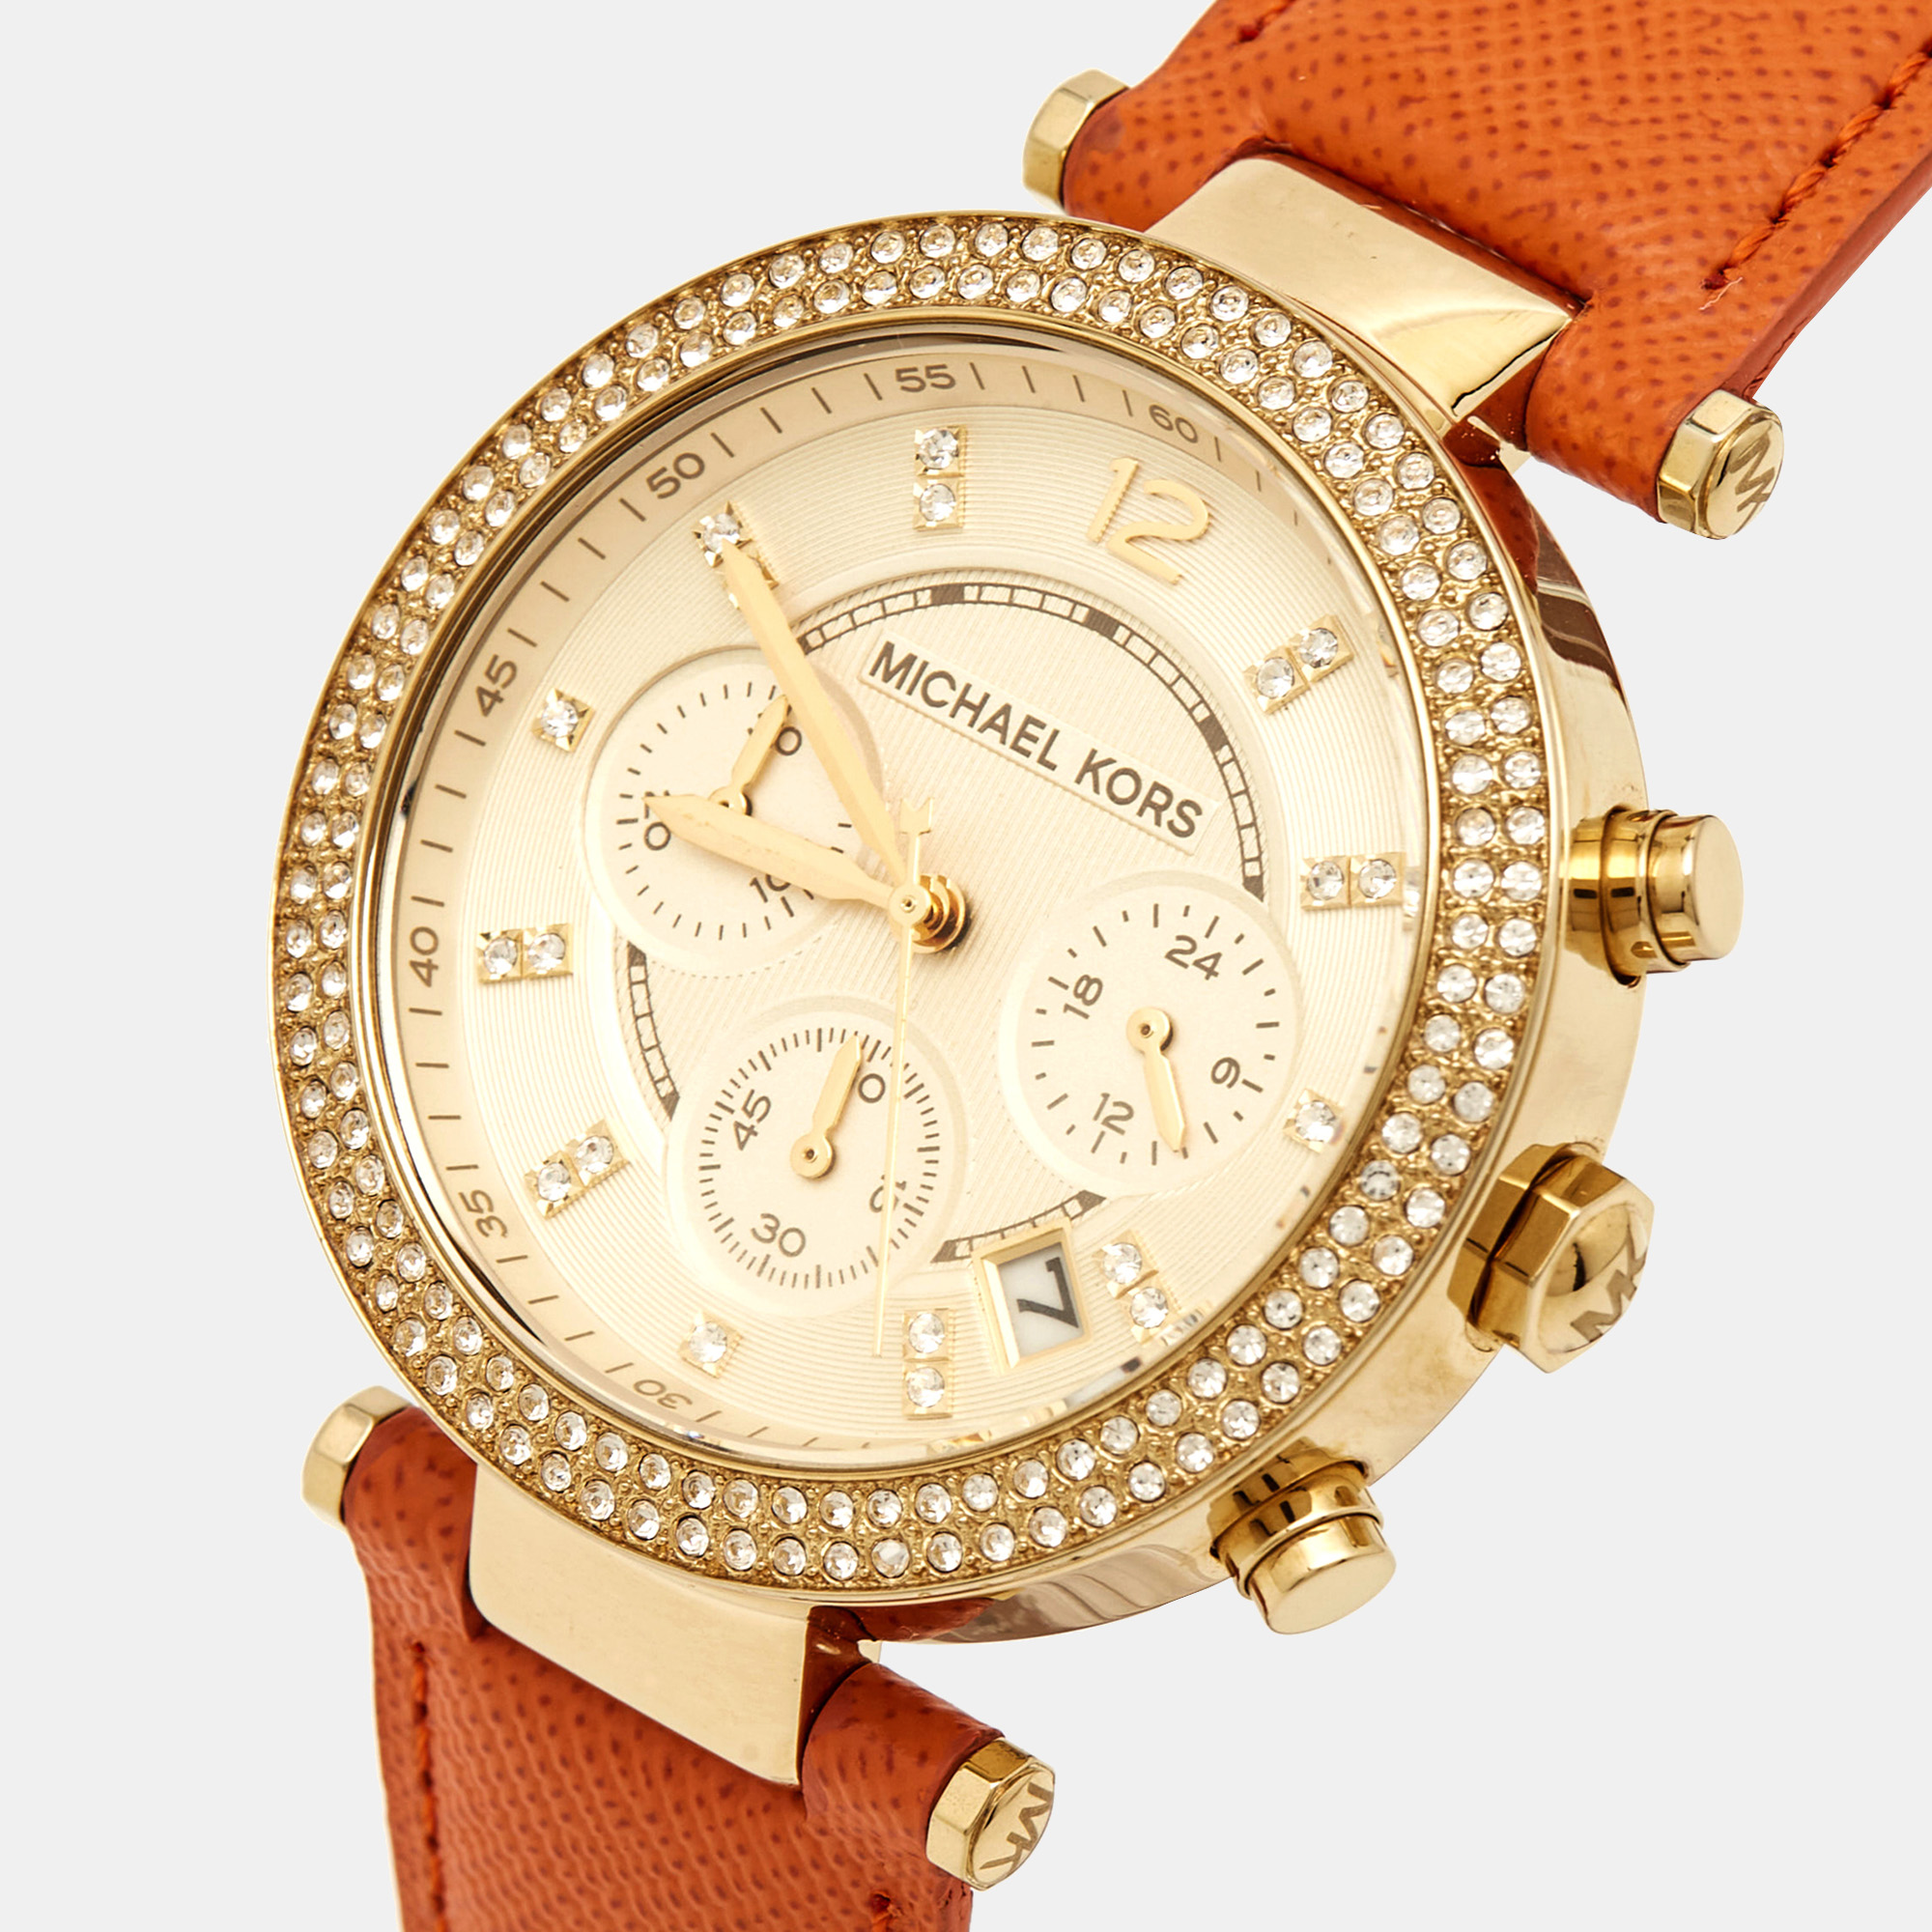 

MIchael Kors Champagne Gold Plated Stainless Steel Leather Crystal Embellished Parker MK2279 Women's Wristwatch, Orange